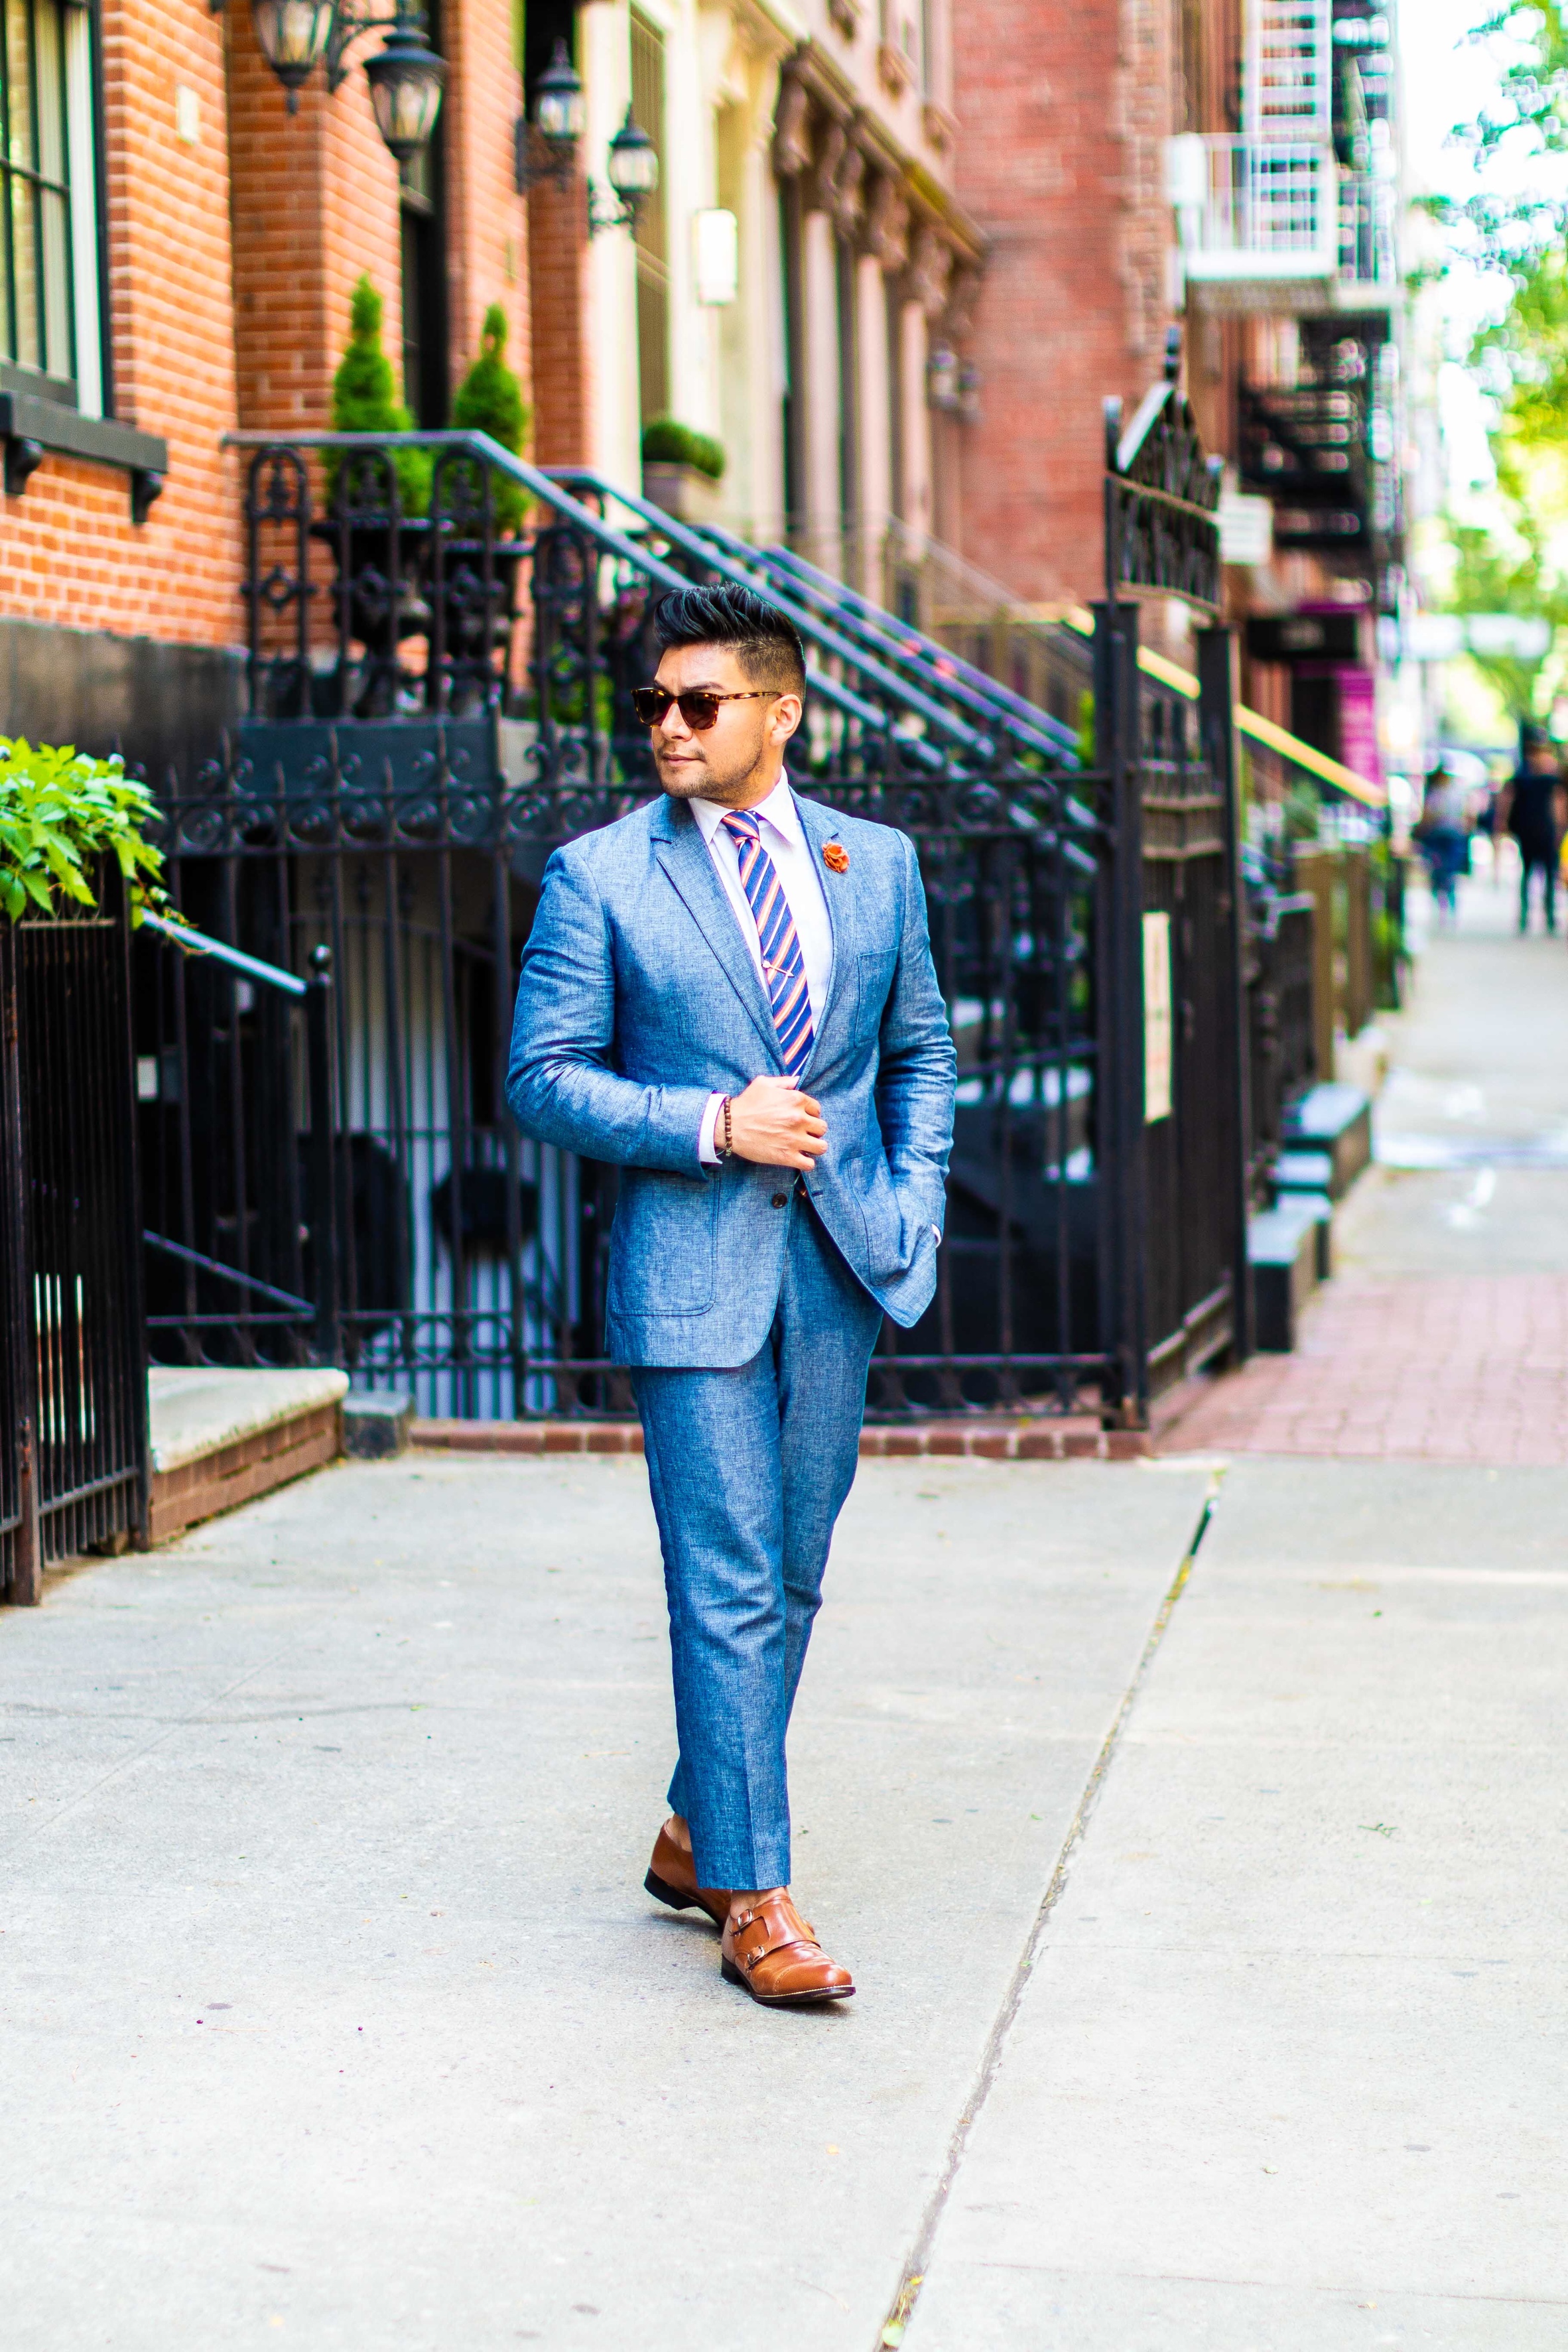 Double monk strap shoes with a blue suit men - dandy in the bronx